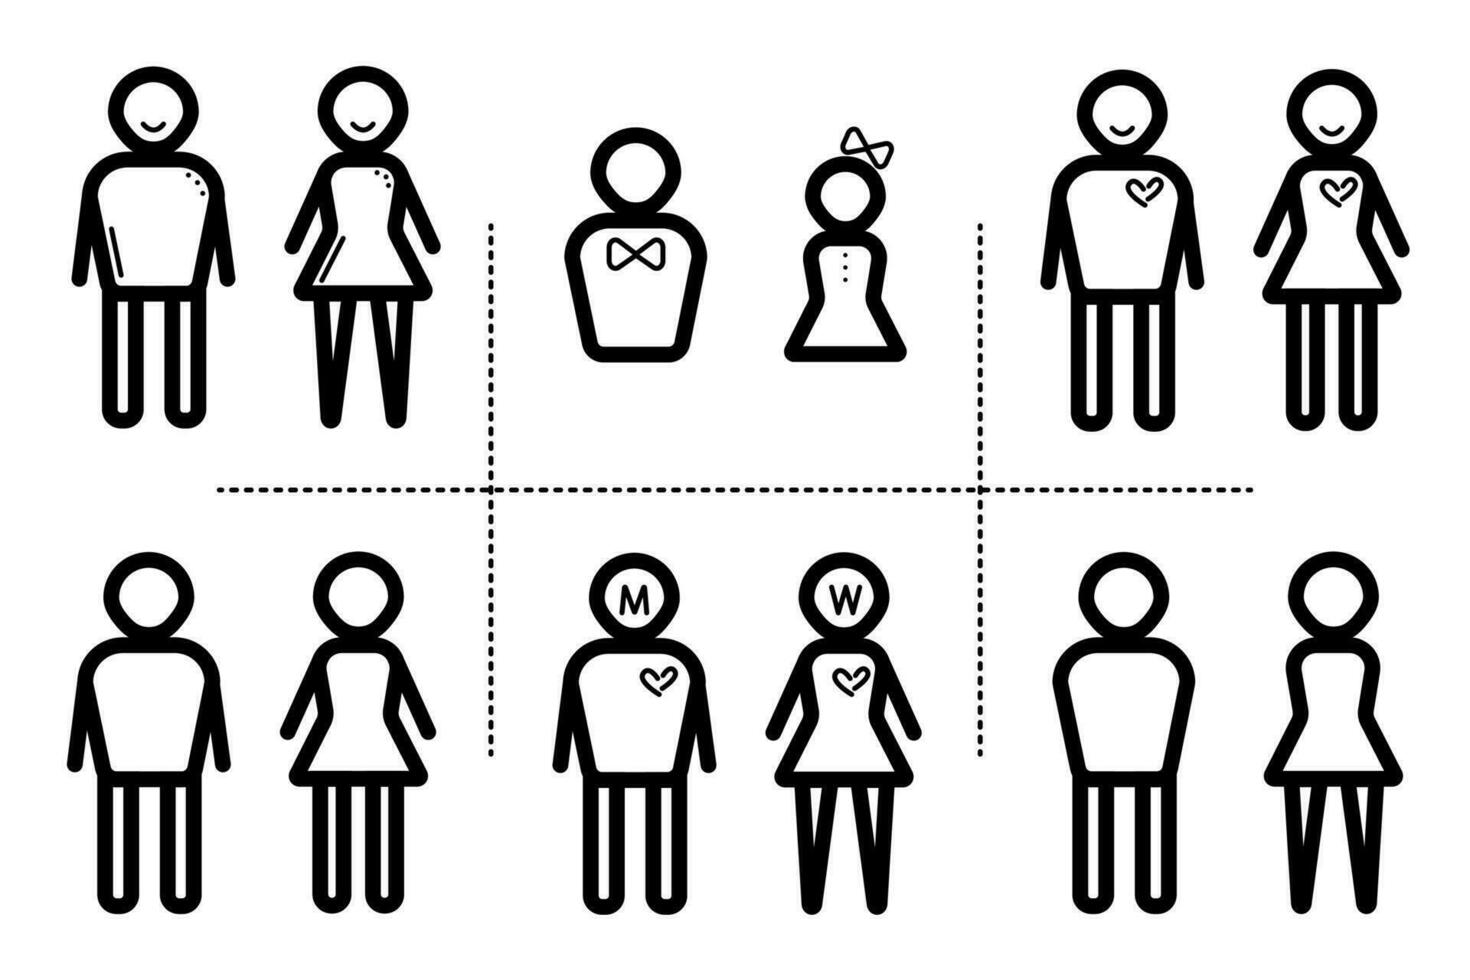 Woman and man black line icon set, male and female symbols, vector pictograms of couple